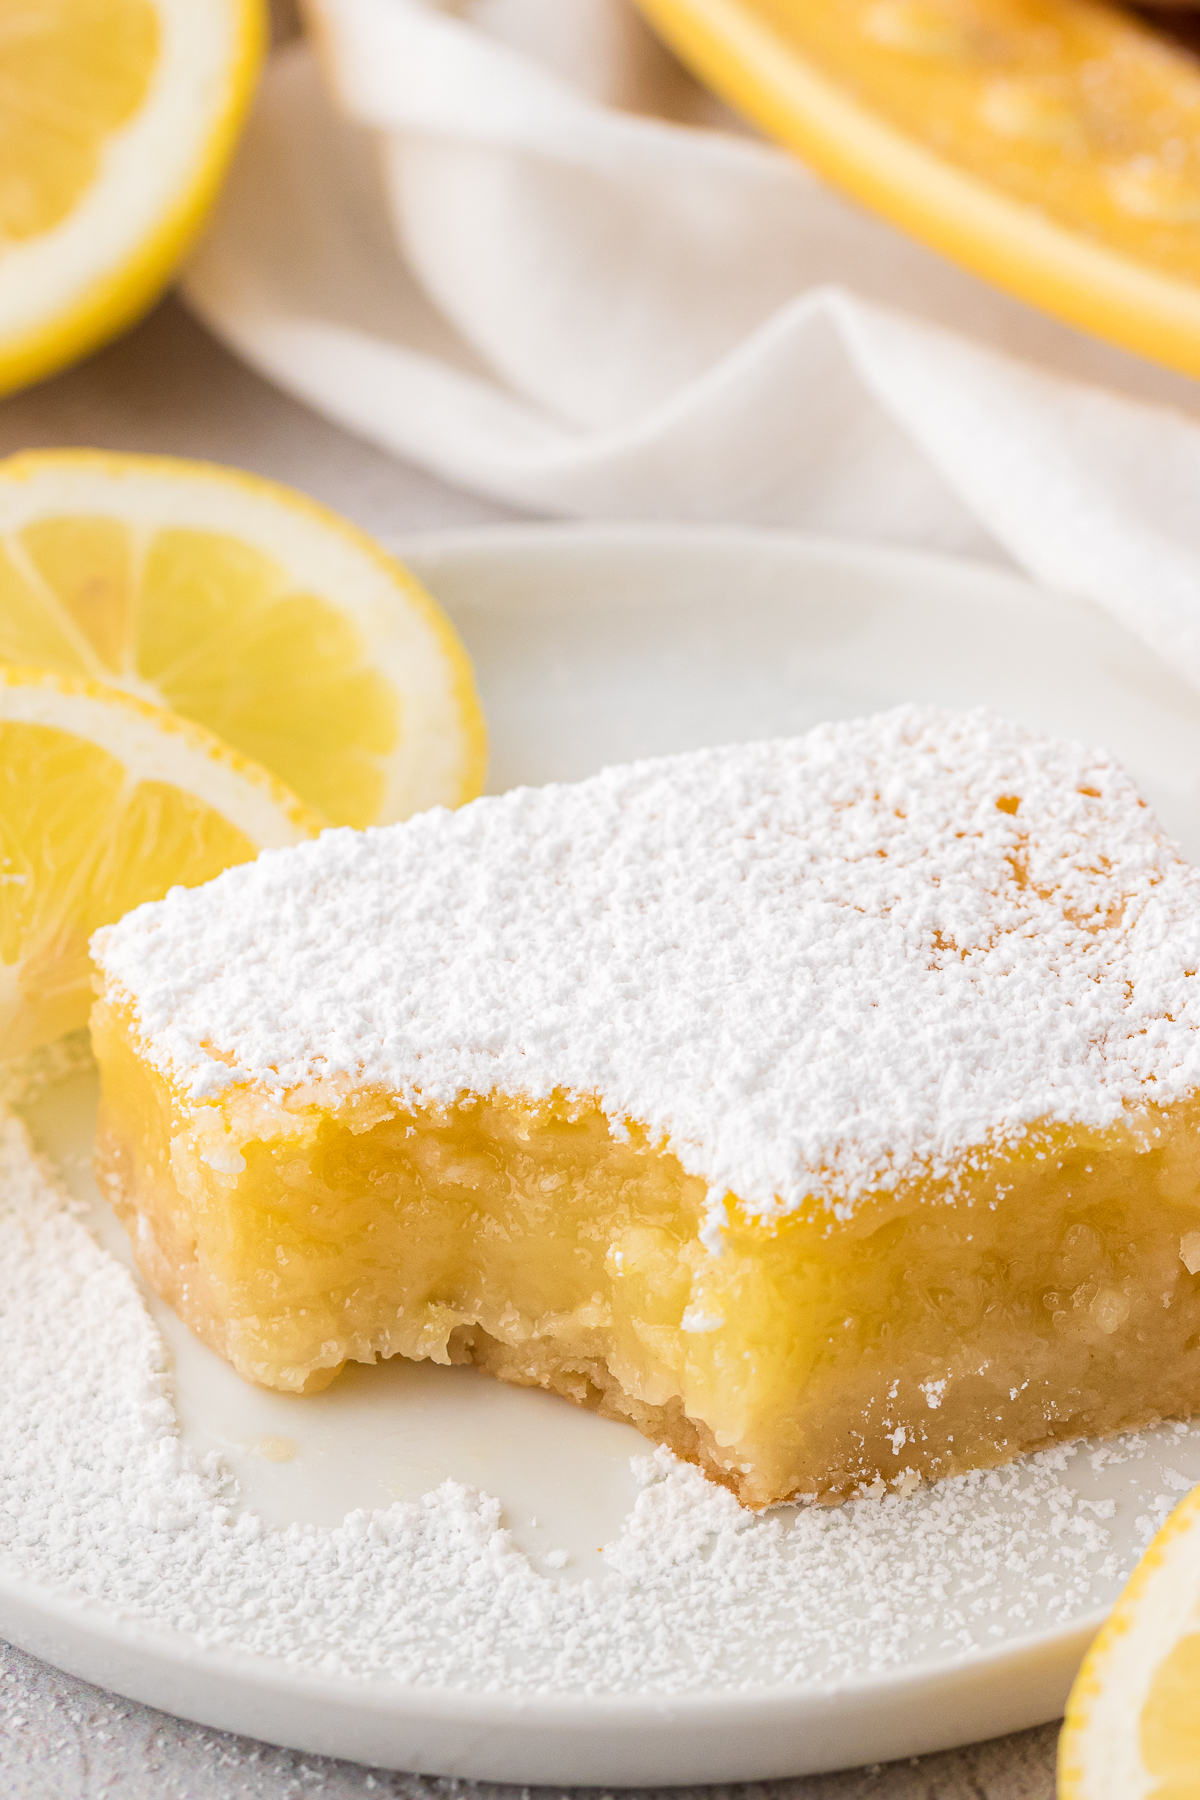 a lemon bar slice with one bite missing on a white plate dusted with powdered sugar and surrounded by lemon slices